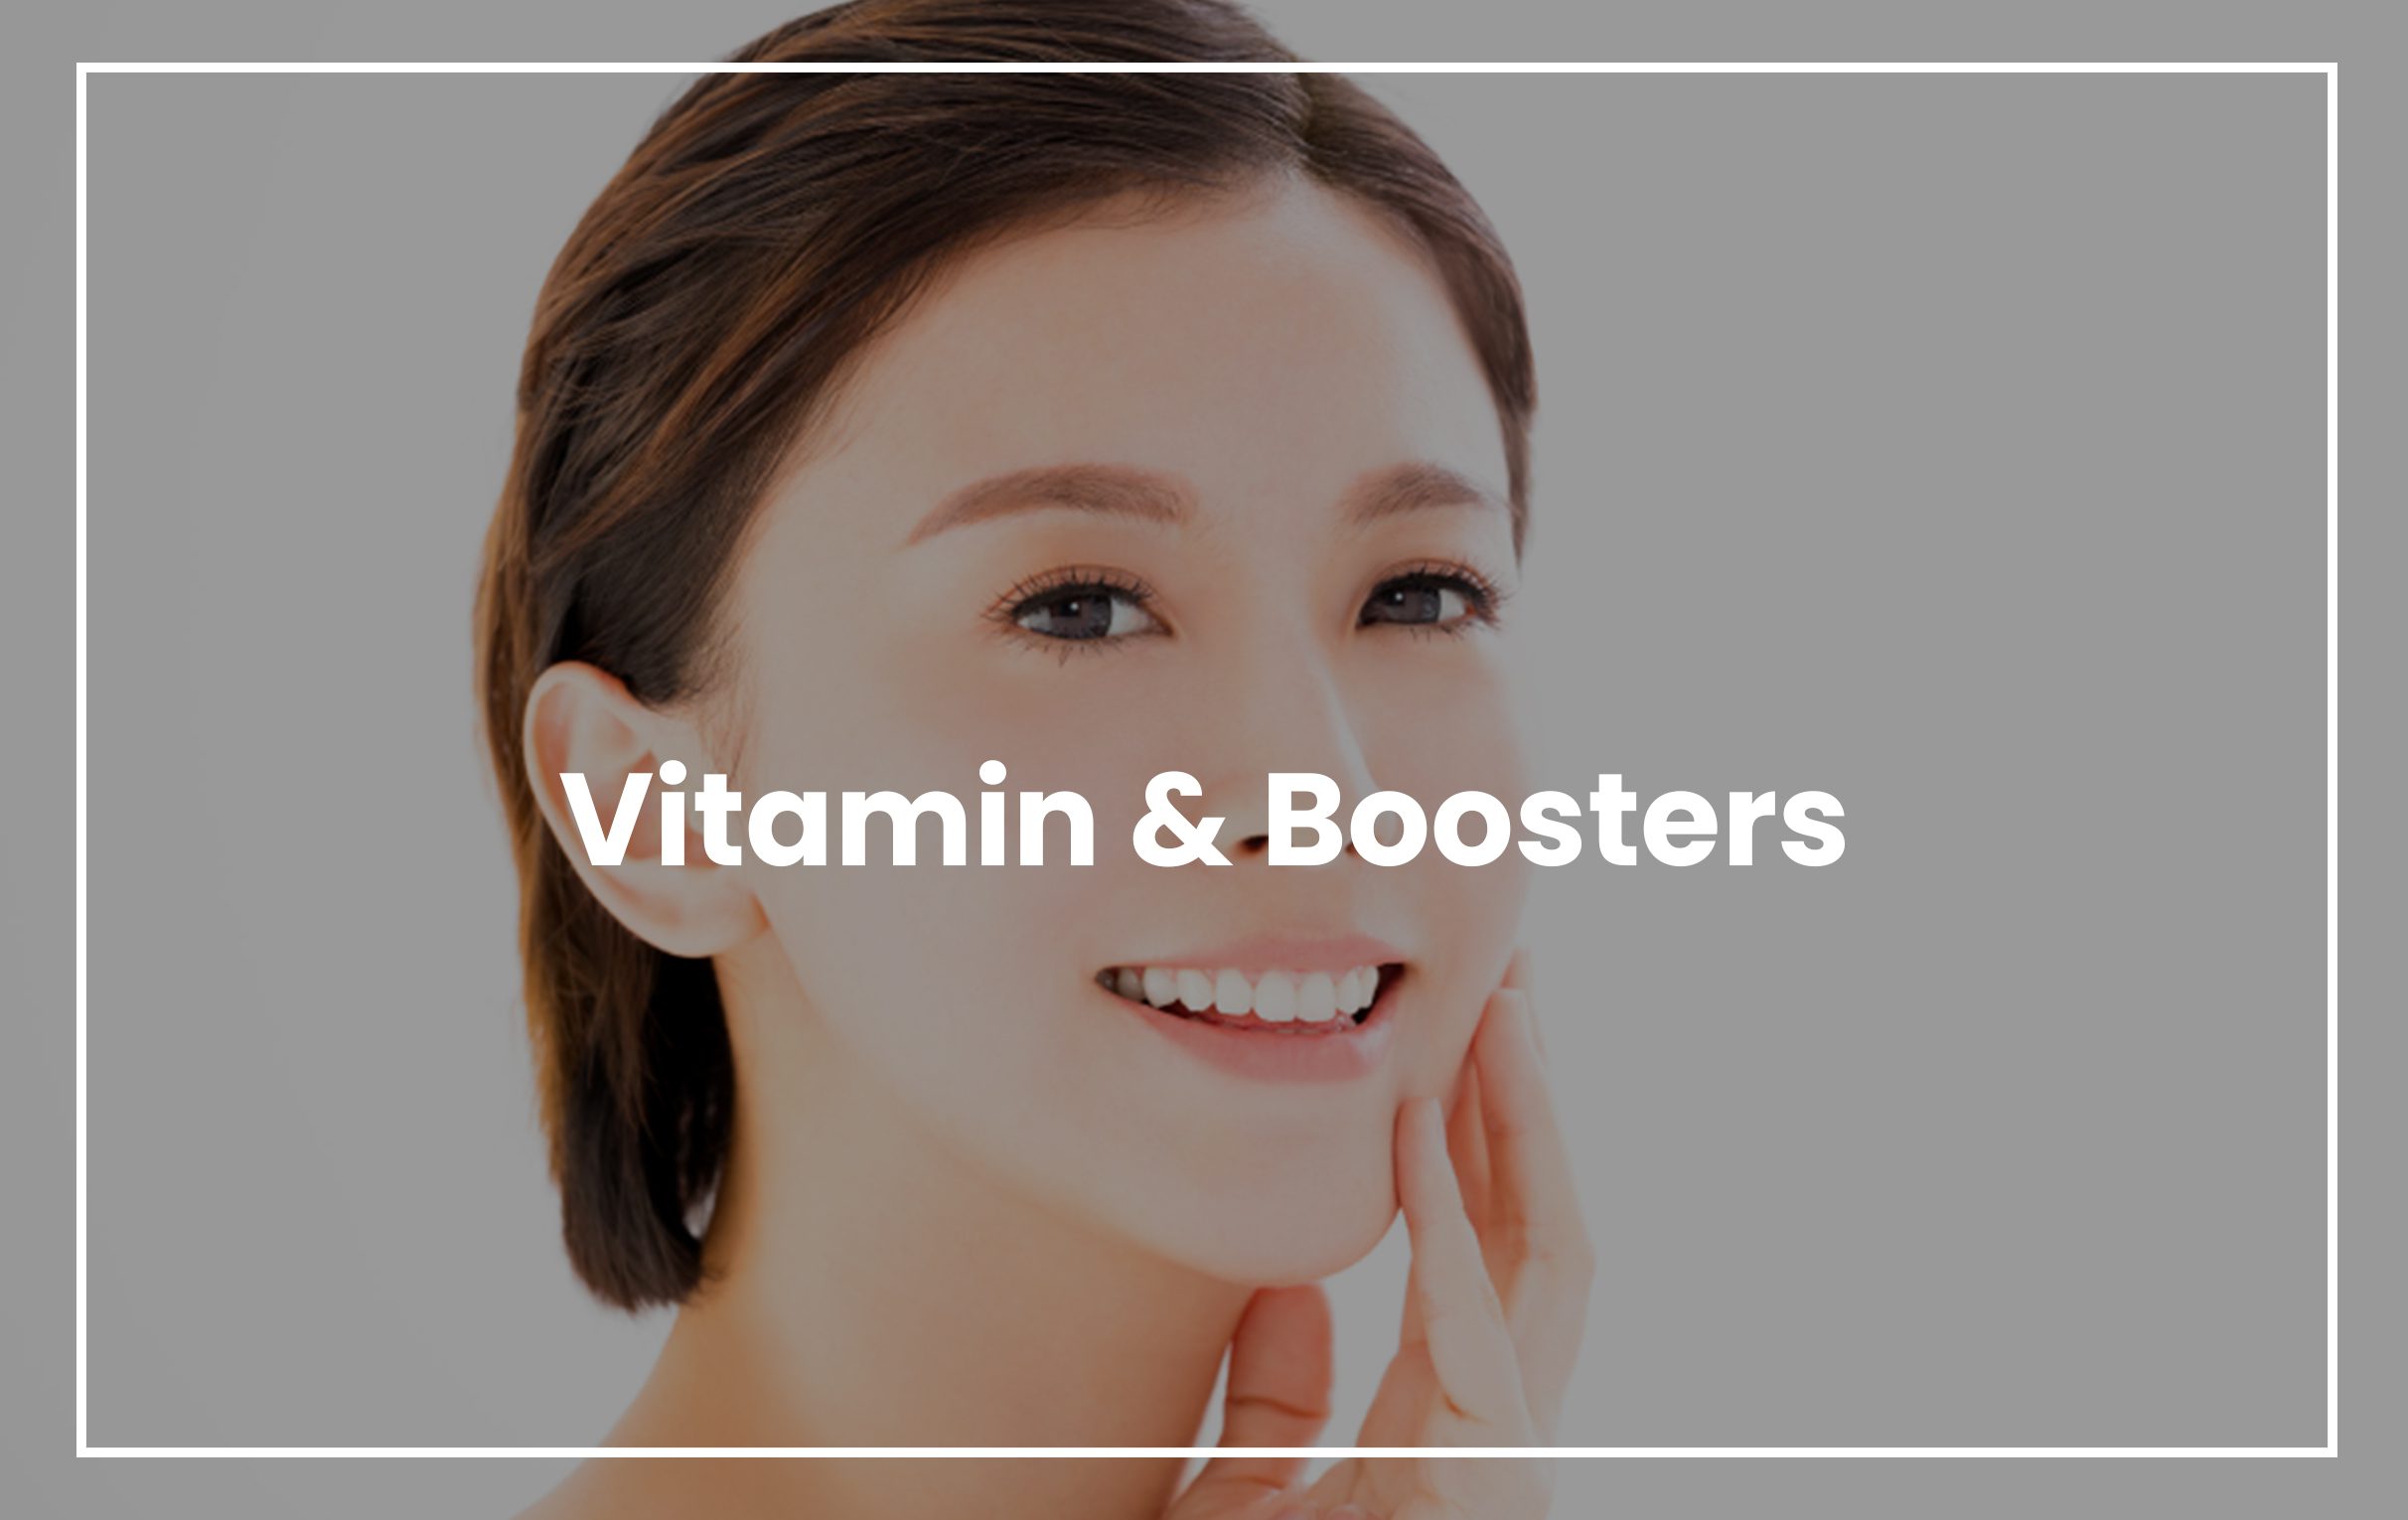 Vitamin & Boosters price list at Rejuvie aesthetic and dermatology Bali